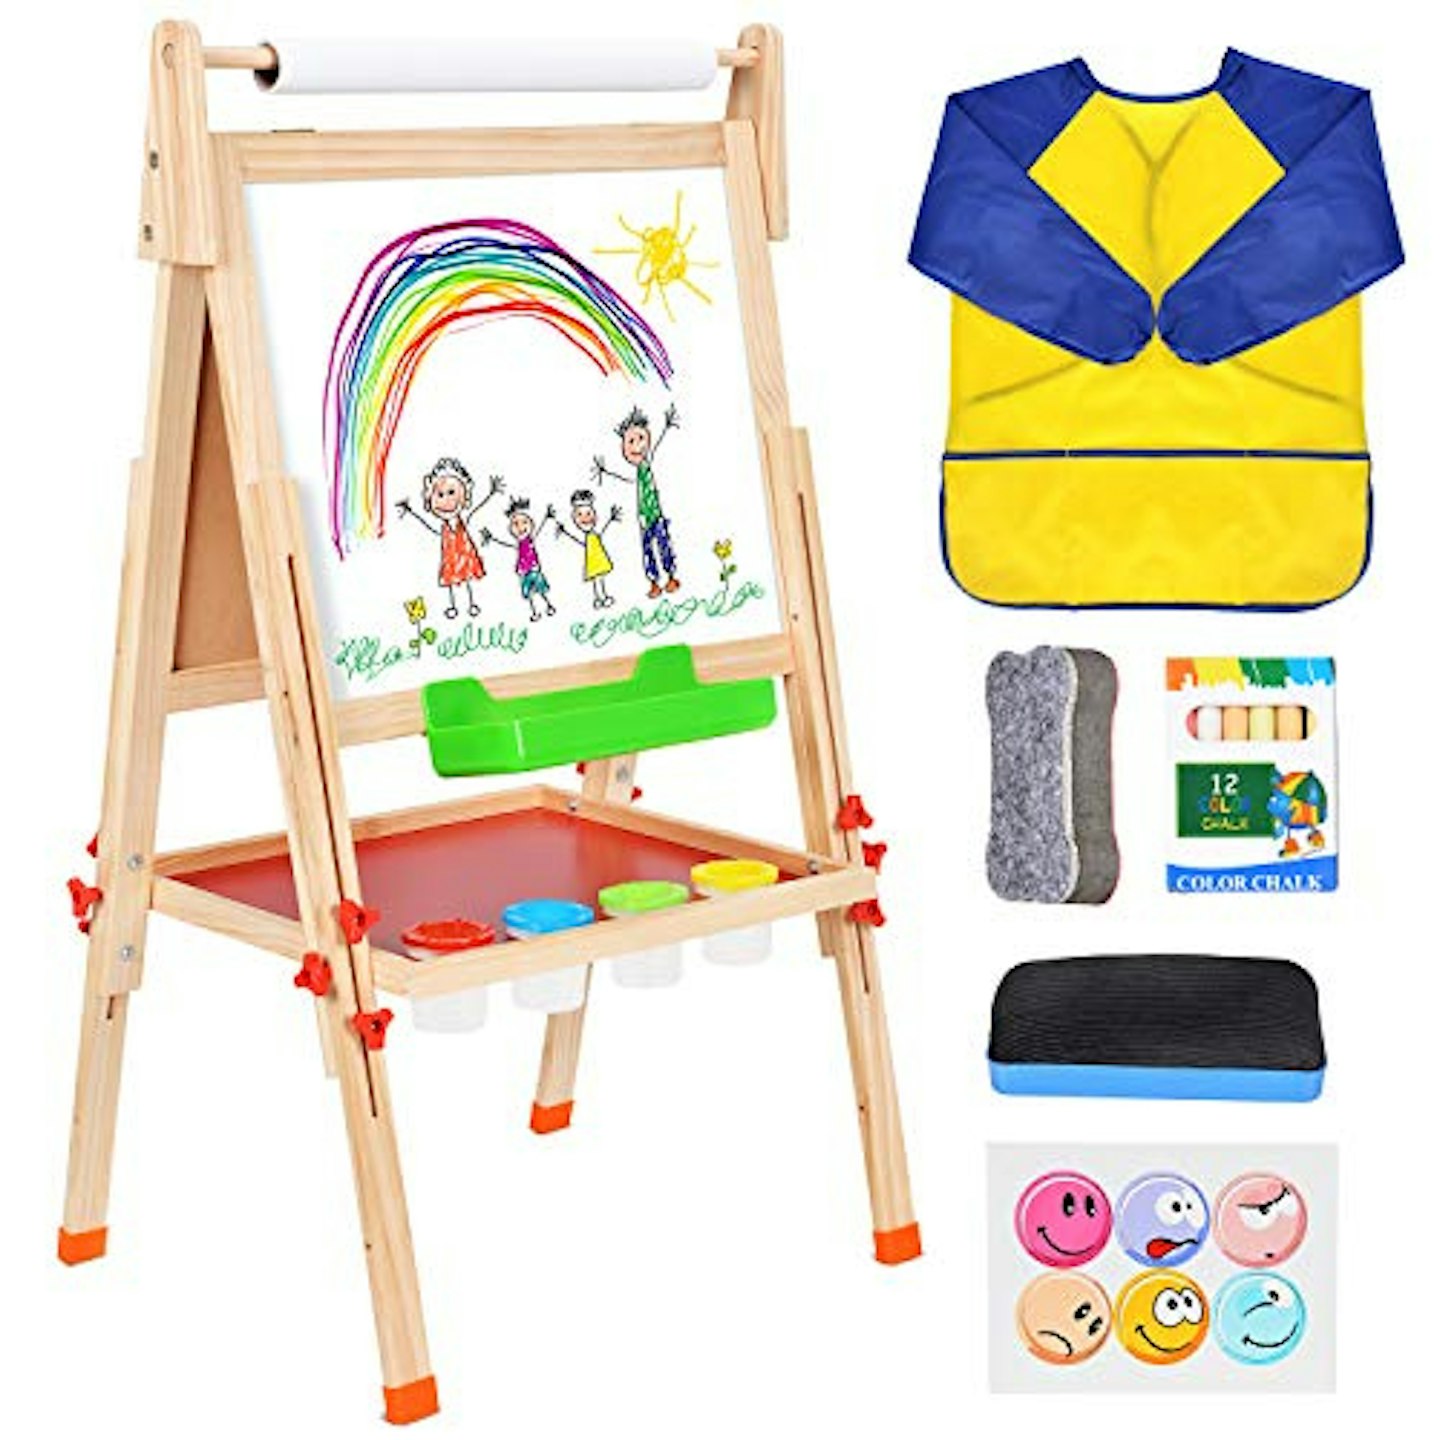 Baby painting ideas for your little Picasso